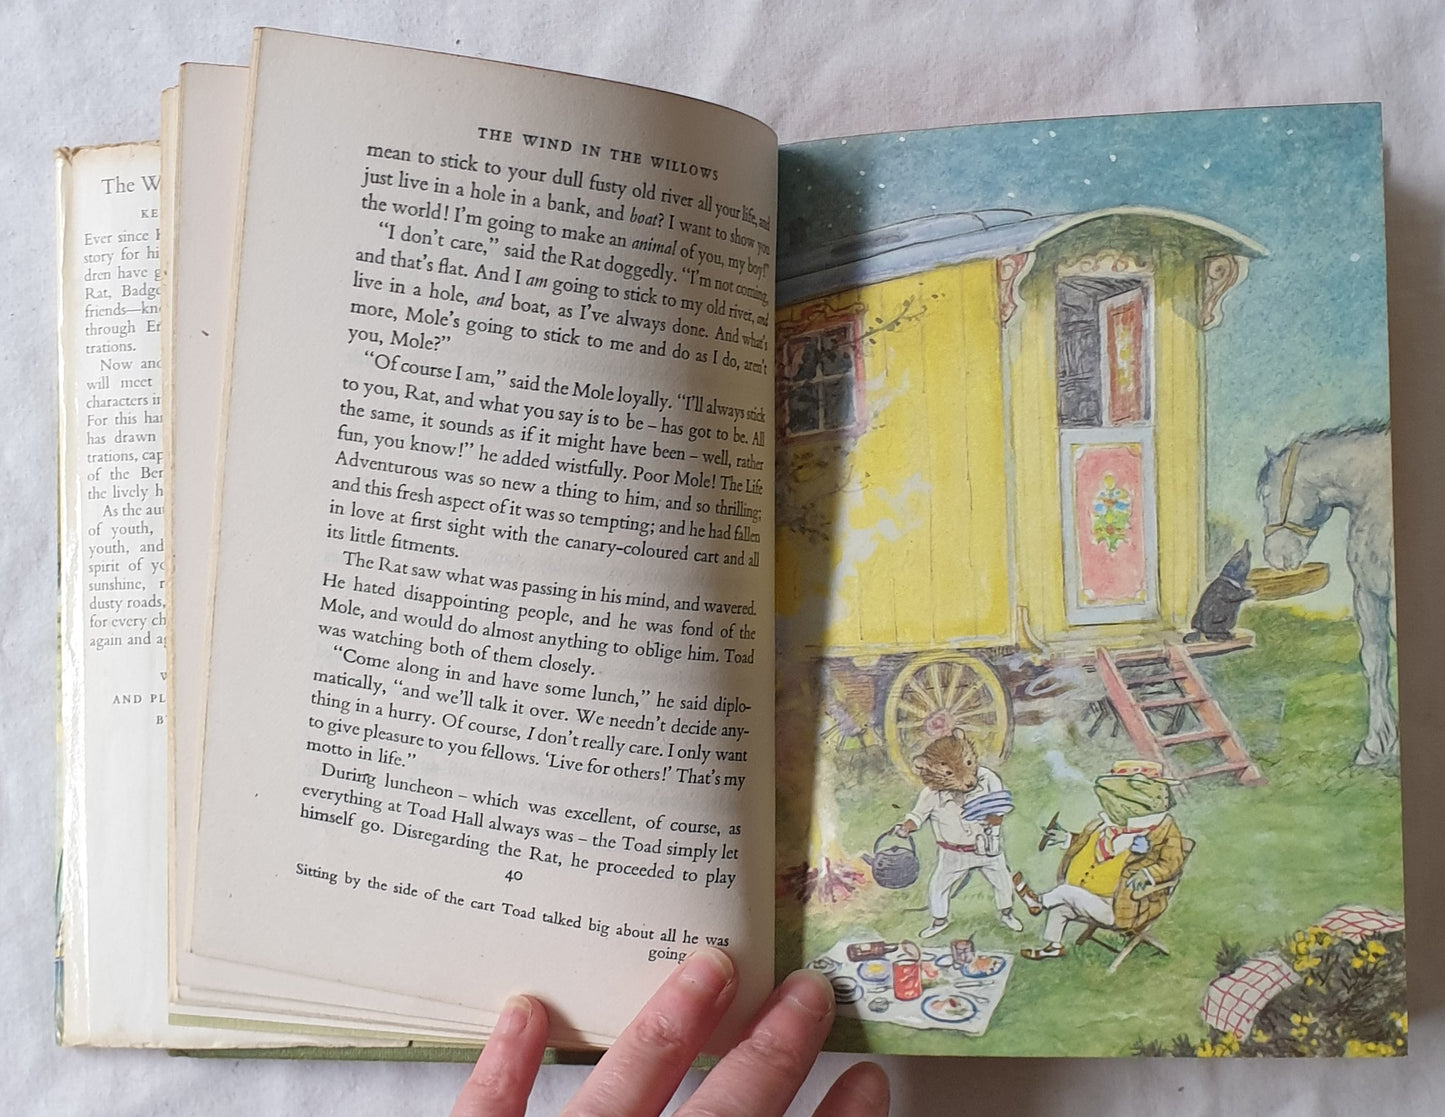 The Wind in the Willows  by Kenneth Grahame